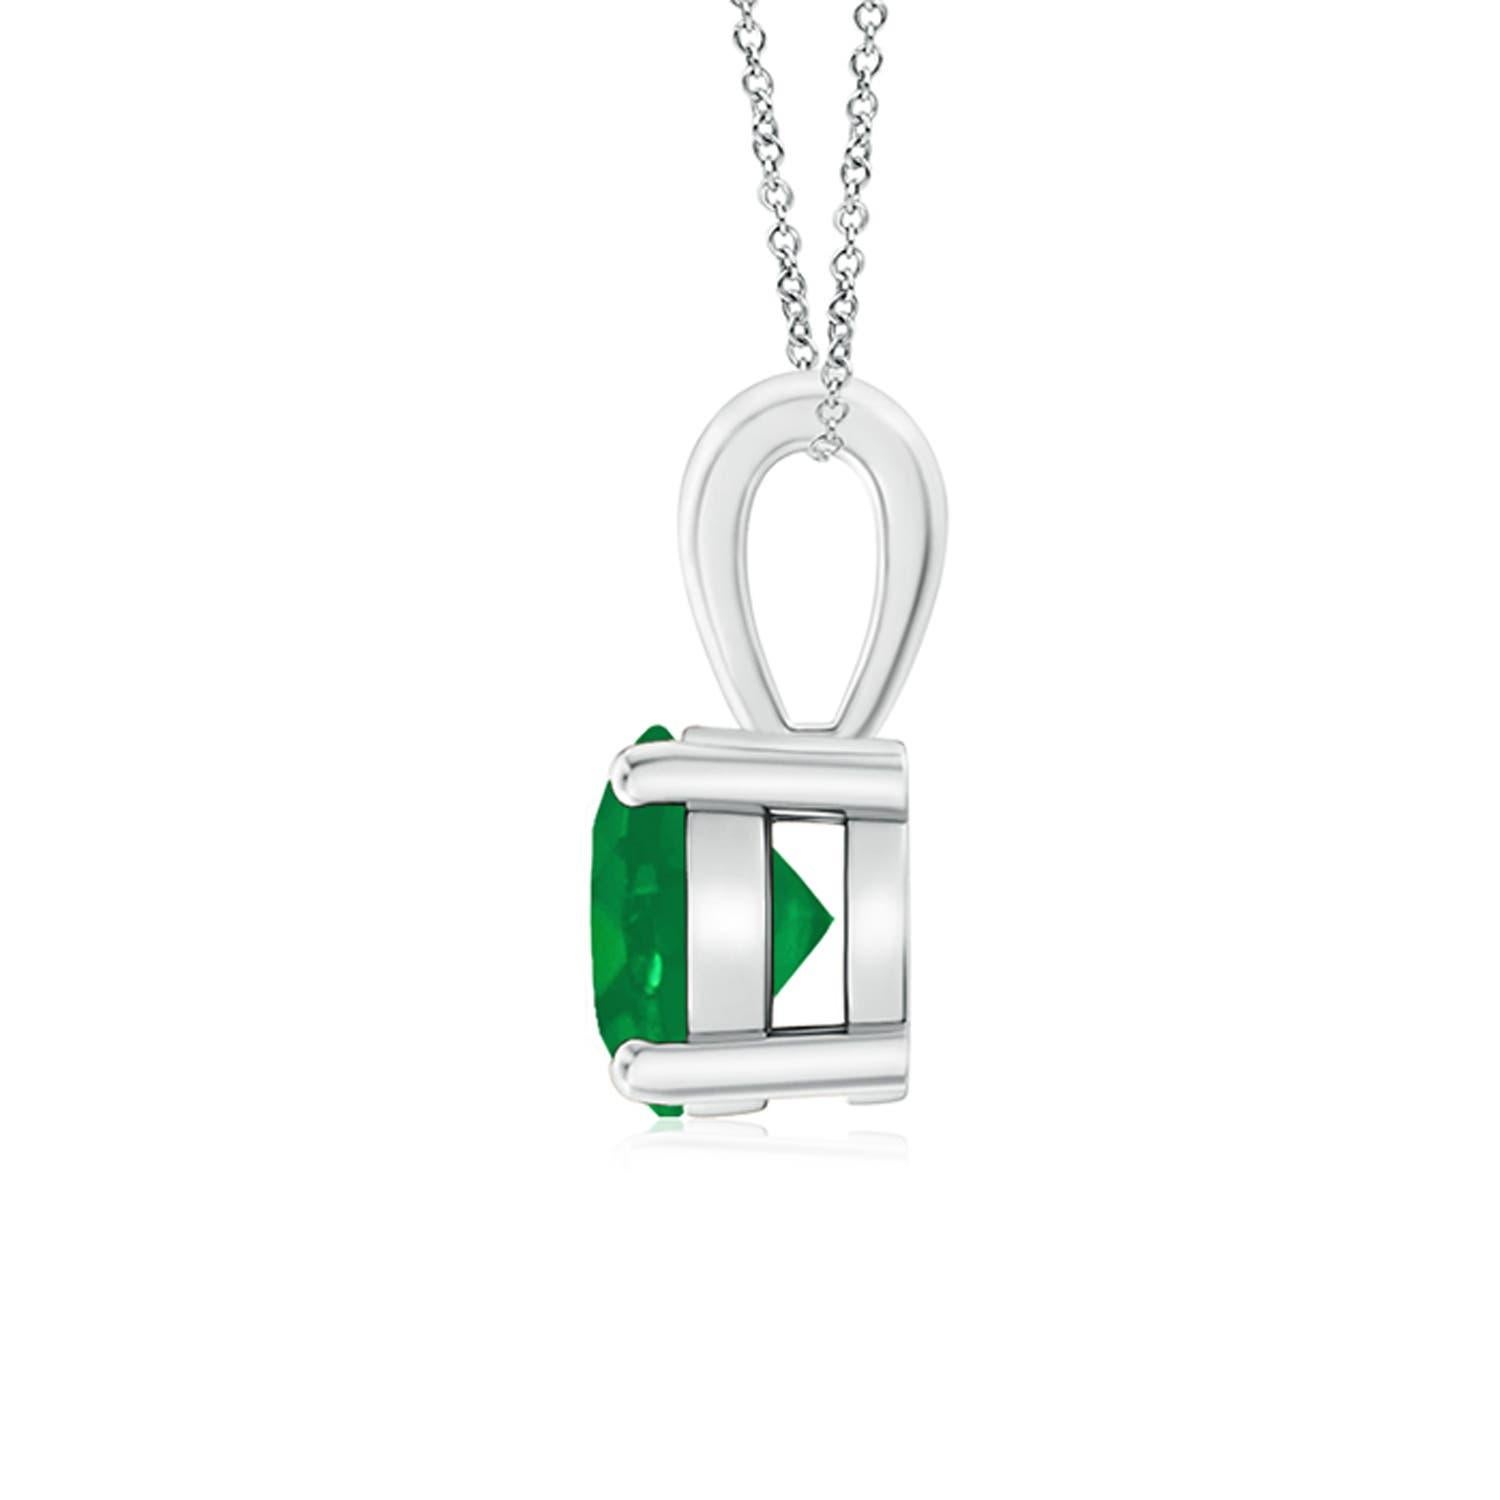 Linked to a lustrous bale is a lush green emerald solitaire secured in a four prong setting. Crafted in 14k white gold, the elegant design of this classic emerald pendant draws all attention towards the magnificence of the center stone.
Emerald is